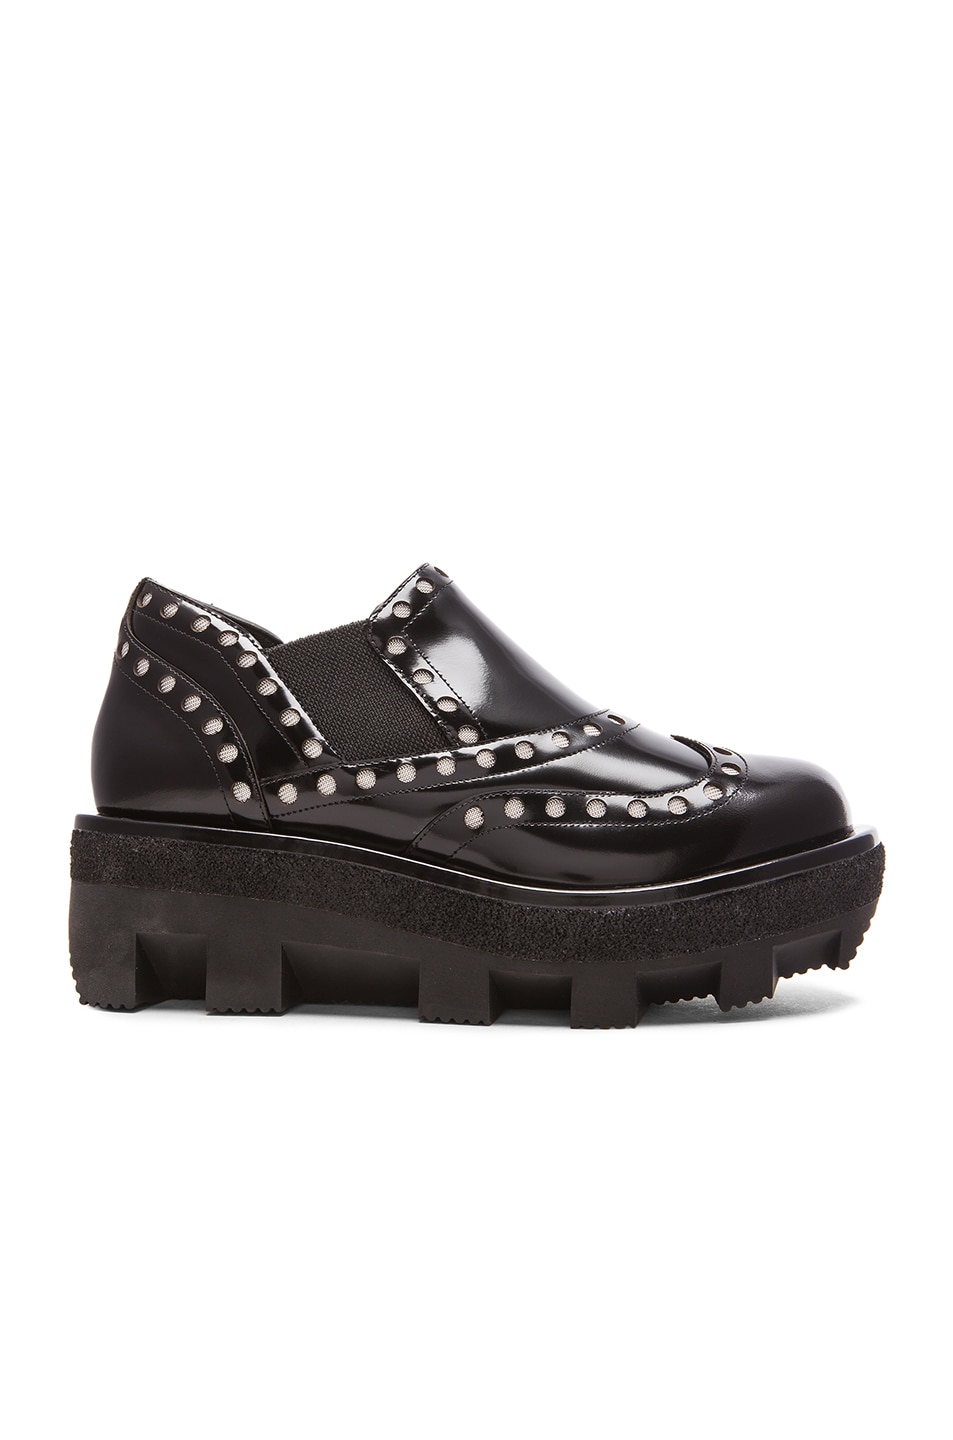 Image 1 of Alexander Wang Steph Spazzolato Low Leather Oxfords in Black